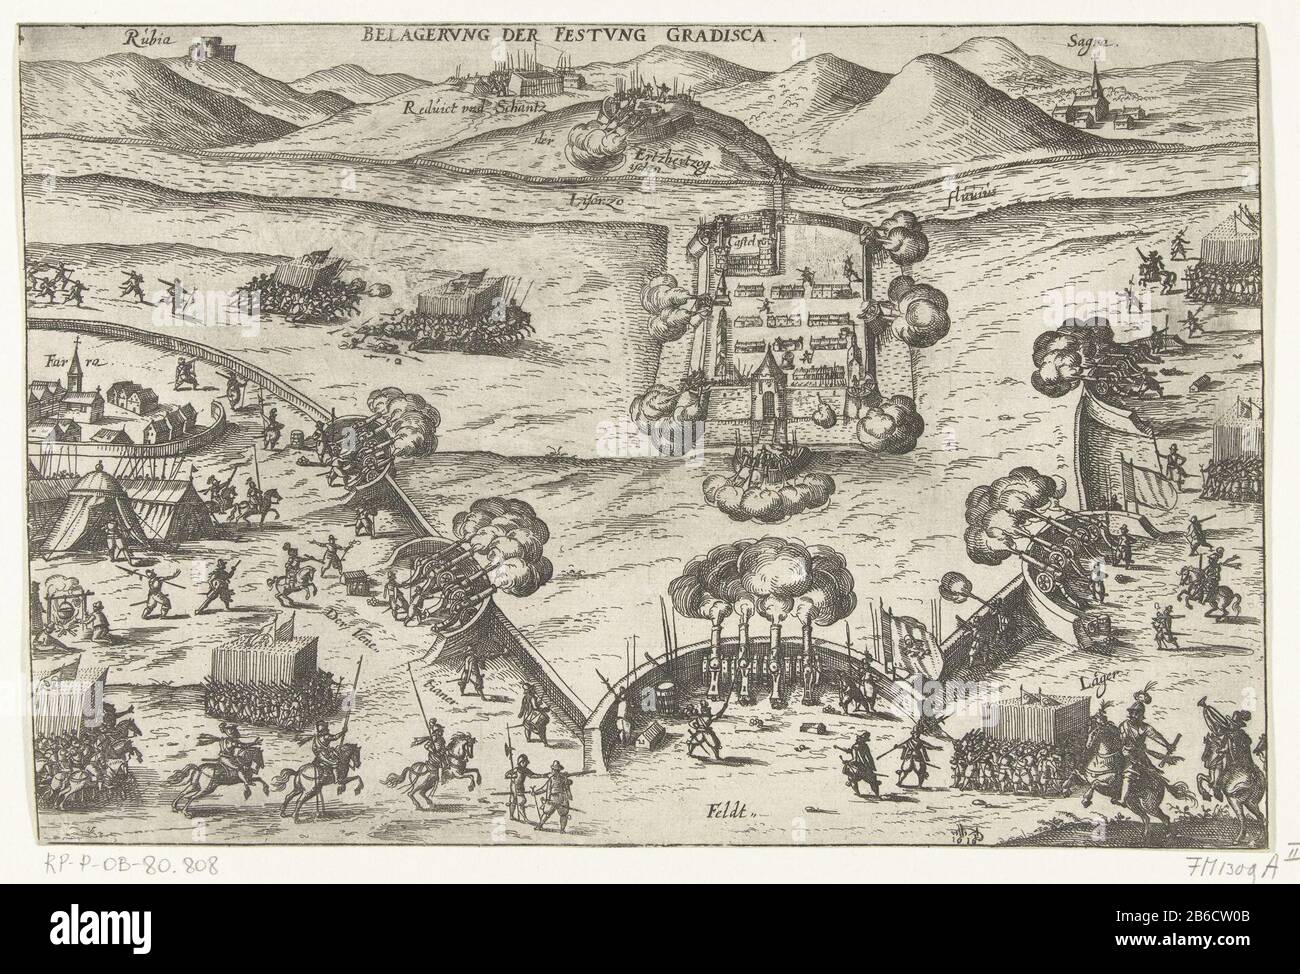 Document van de vesting Gradisca, 1616 siege of the fortress of Gradisca (titel op object) Siege of the fortress Gradisca, on the river Livenzo over Venice, the troops under Johan Ernst I, Count of Nassau-Siegen, 1616. Manufacturer : printmaker: Georg Keller Place manufacture: Germany Date: 1616 Physical features: etching material: paper Technique: etching dimensions: sheet: h 191 mm × W 285 mm Subject : siege, when war of 1616 - 1616 Stock Photo